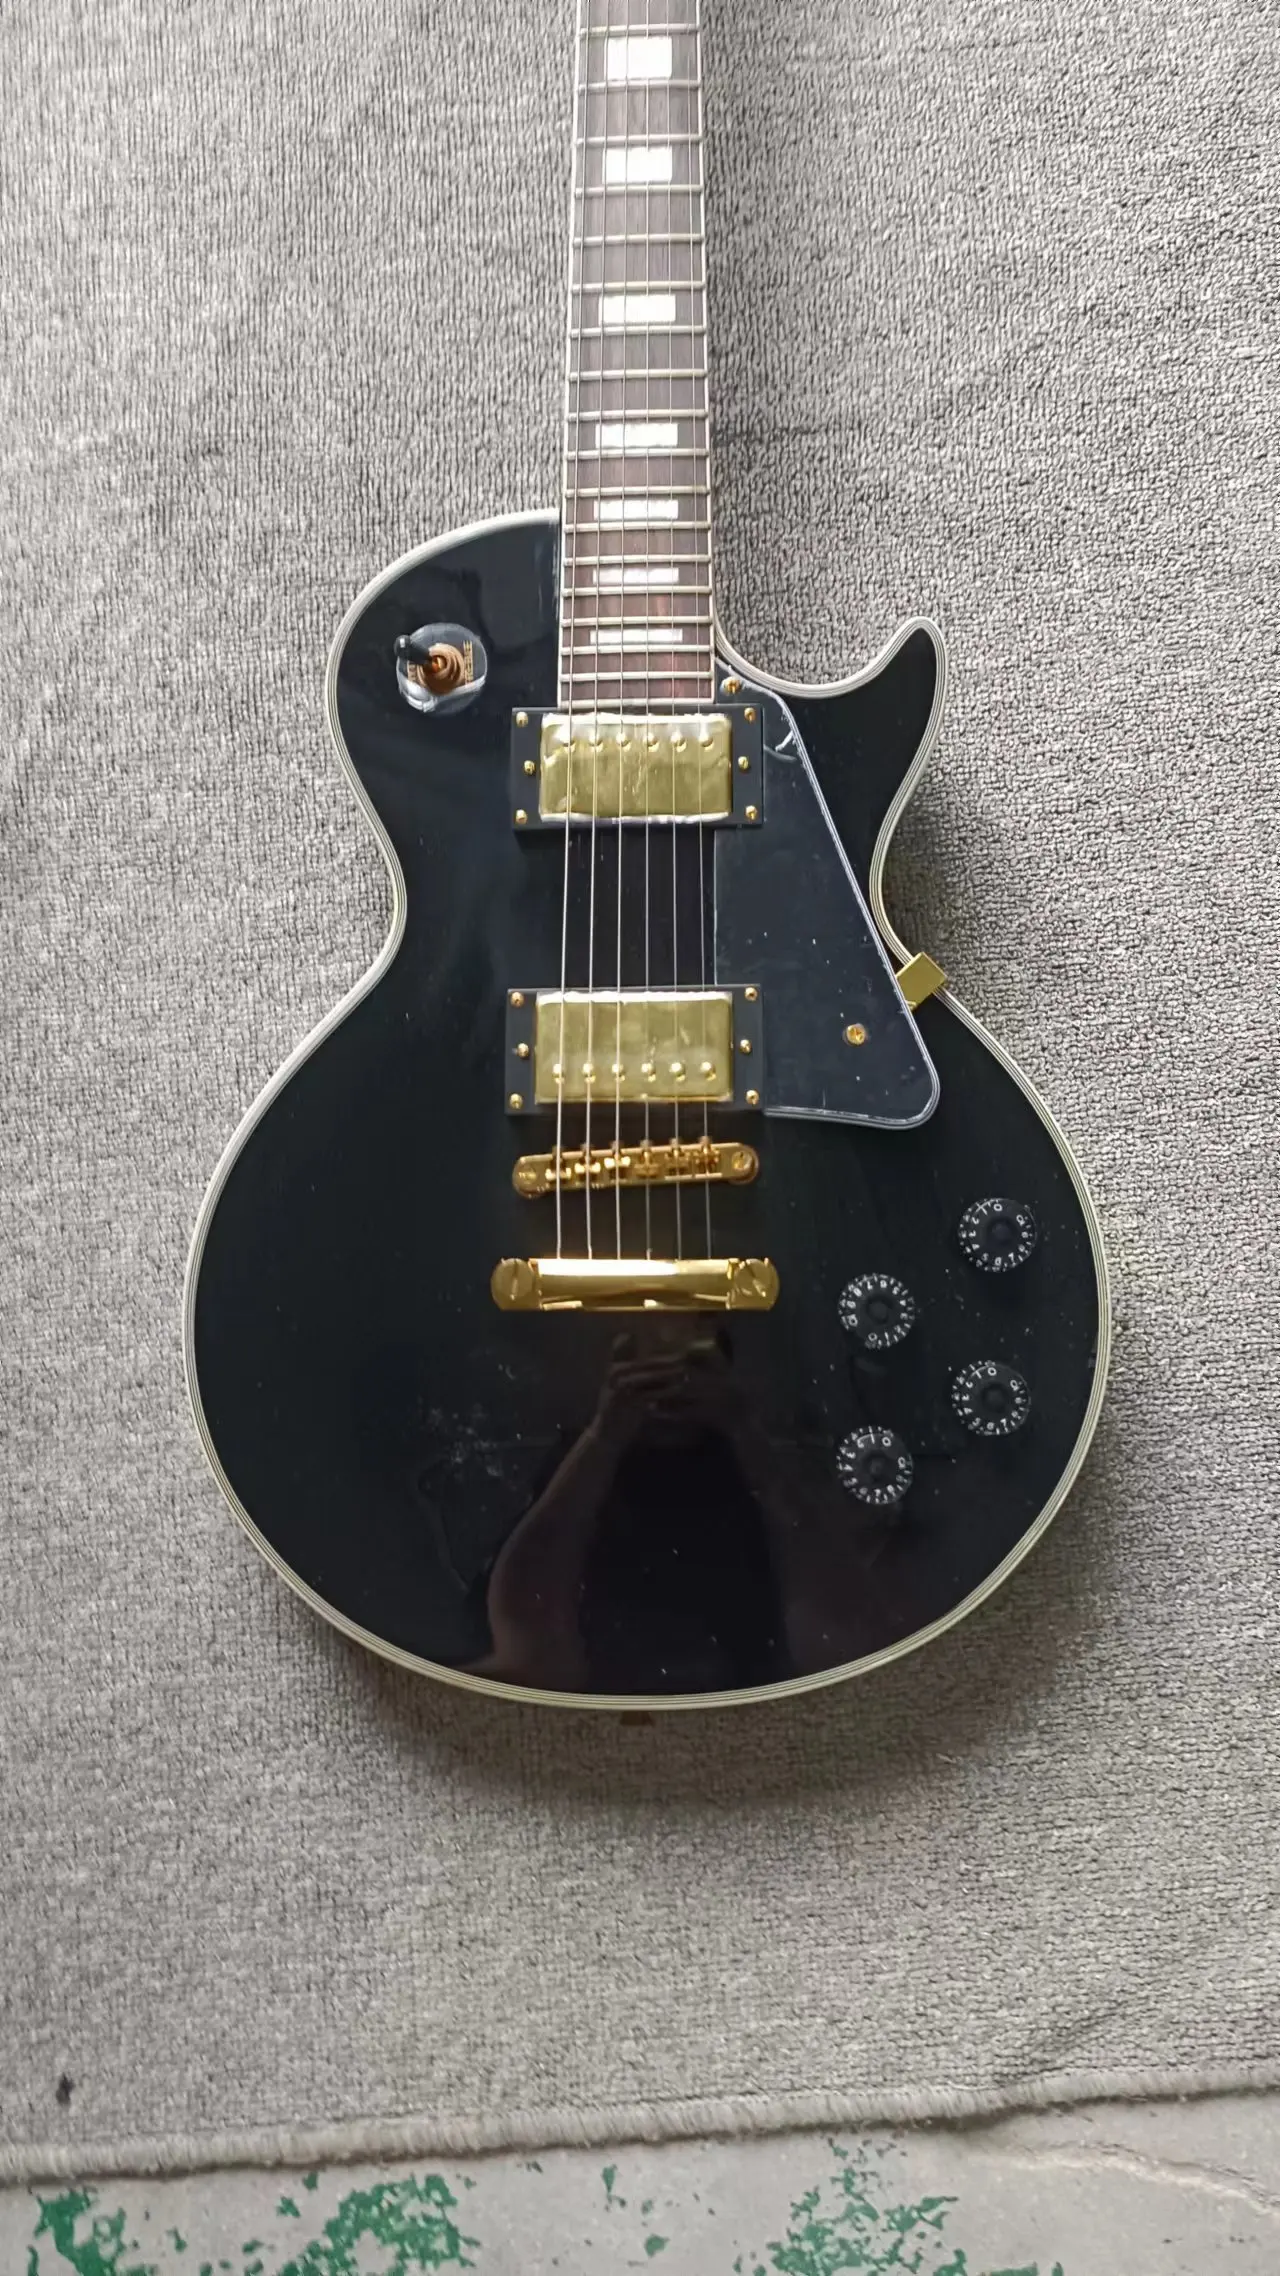 

LP all-in-one electric guitar, black body, white lulu edging, gold cartridge, rosewood fingerboard, gold accessories, real facto